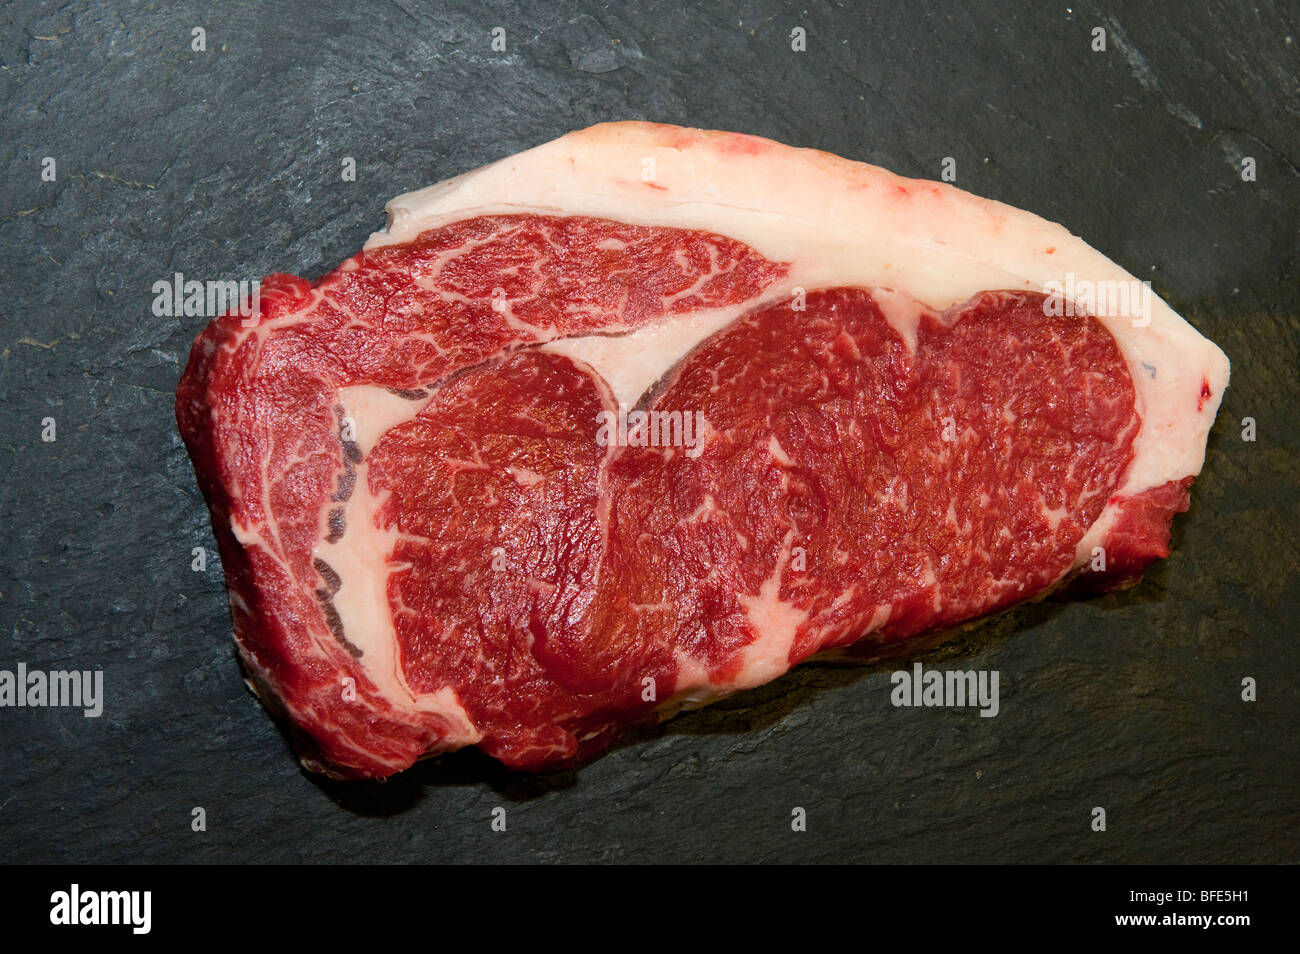 Beef steak from Wagyu cattle Stock Photo